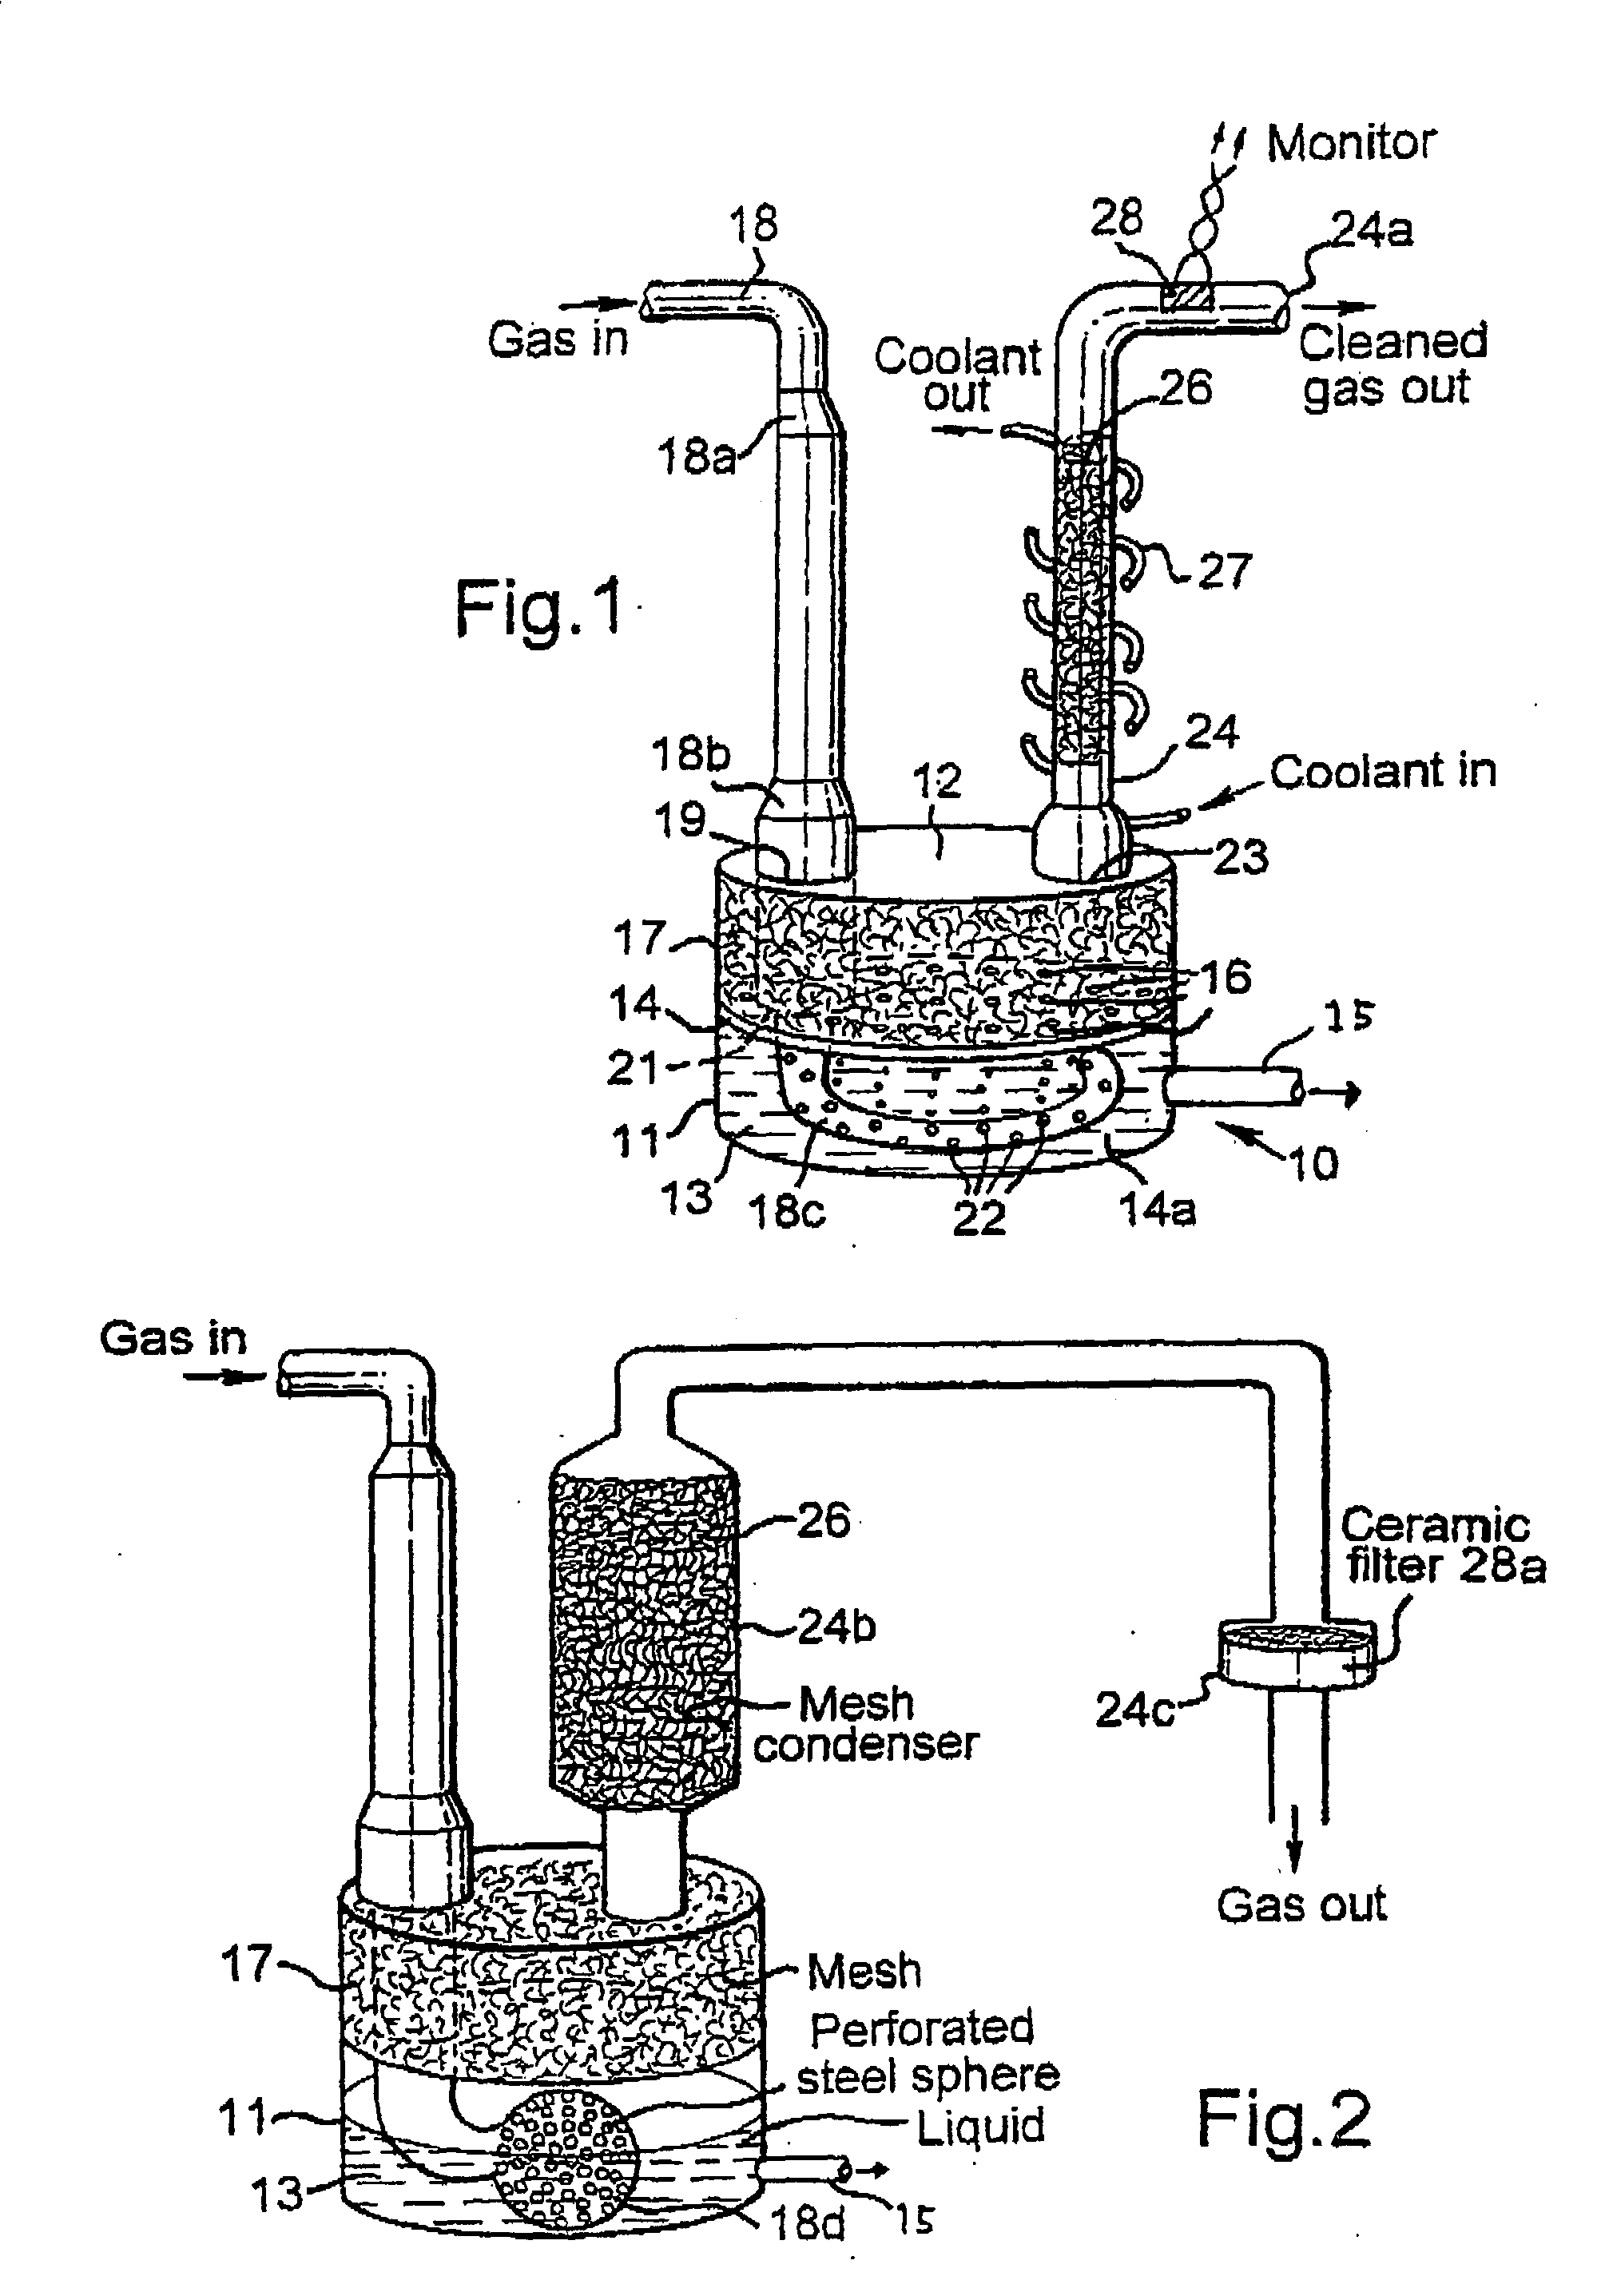 Method and apparatus for removing sulfur components